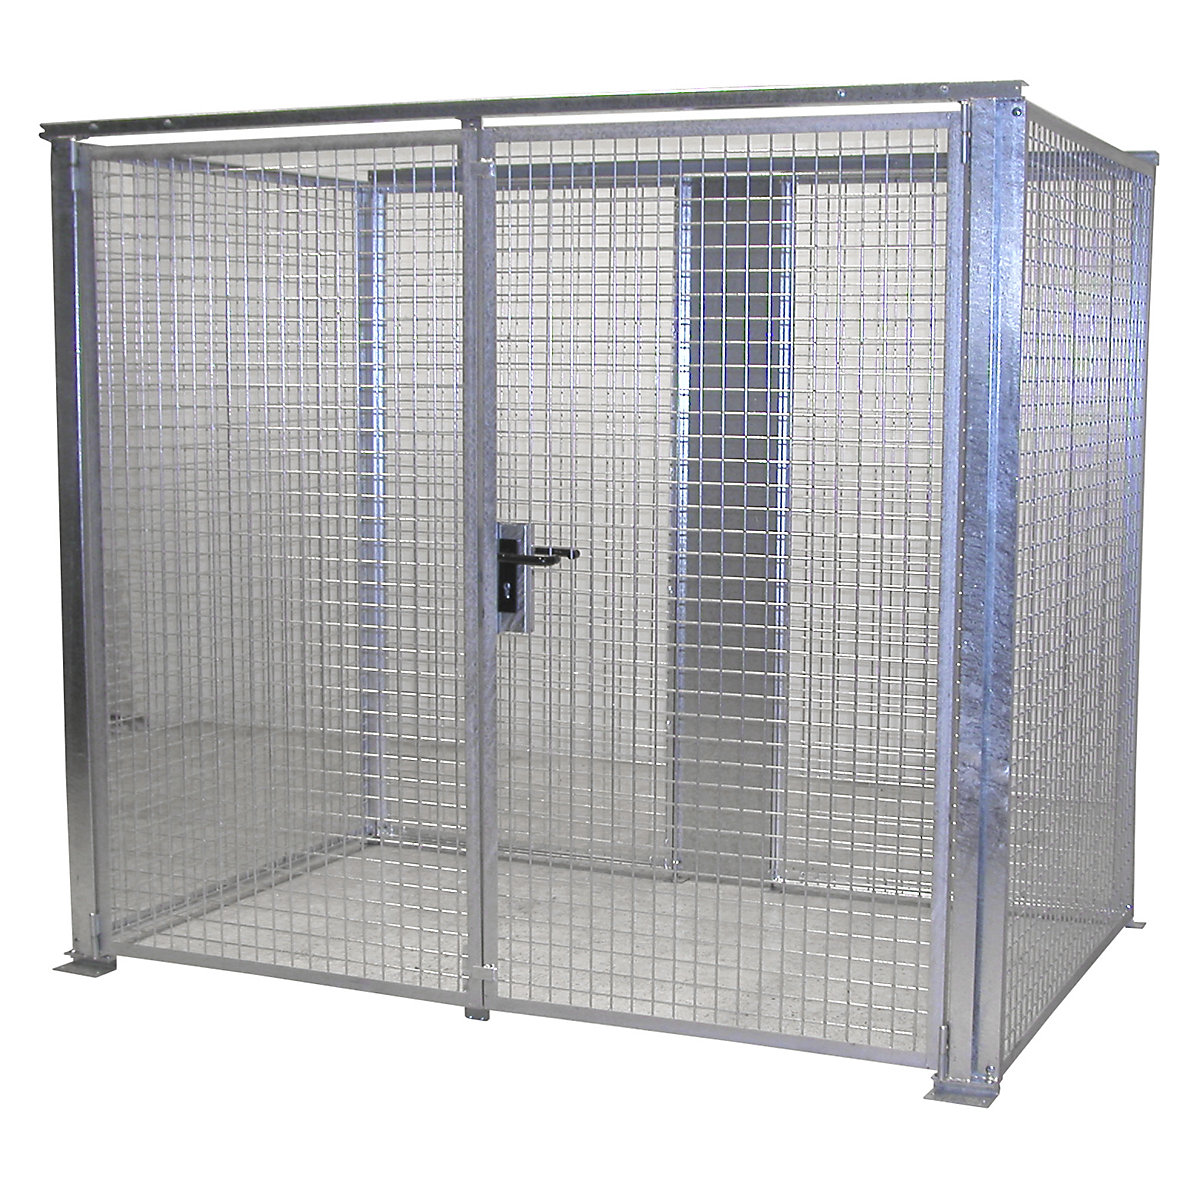 EUROKRAFTpro – Mesh gas cylinder cage, without roof, with double hinged doors, WxD 2400 x 1500 mm